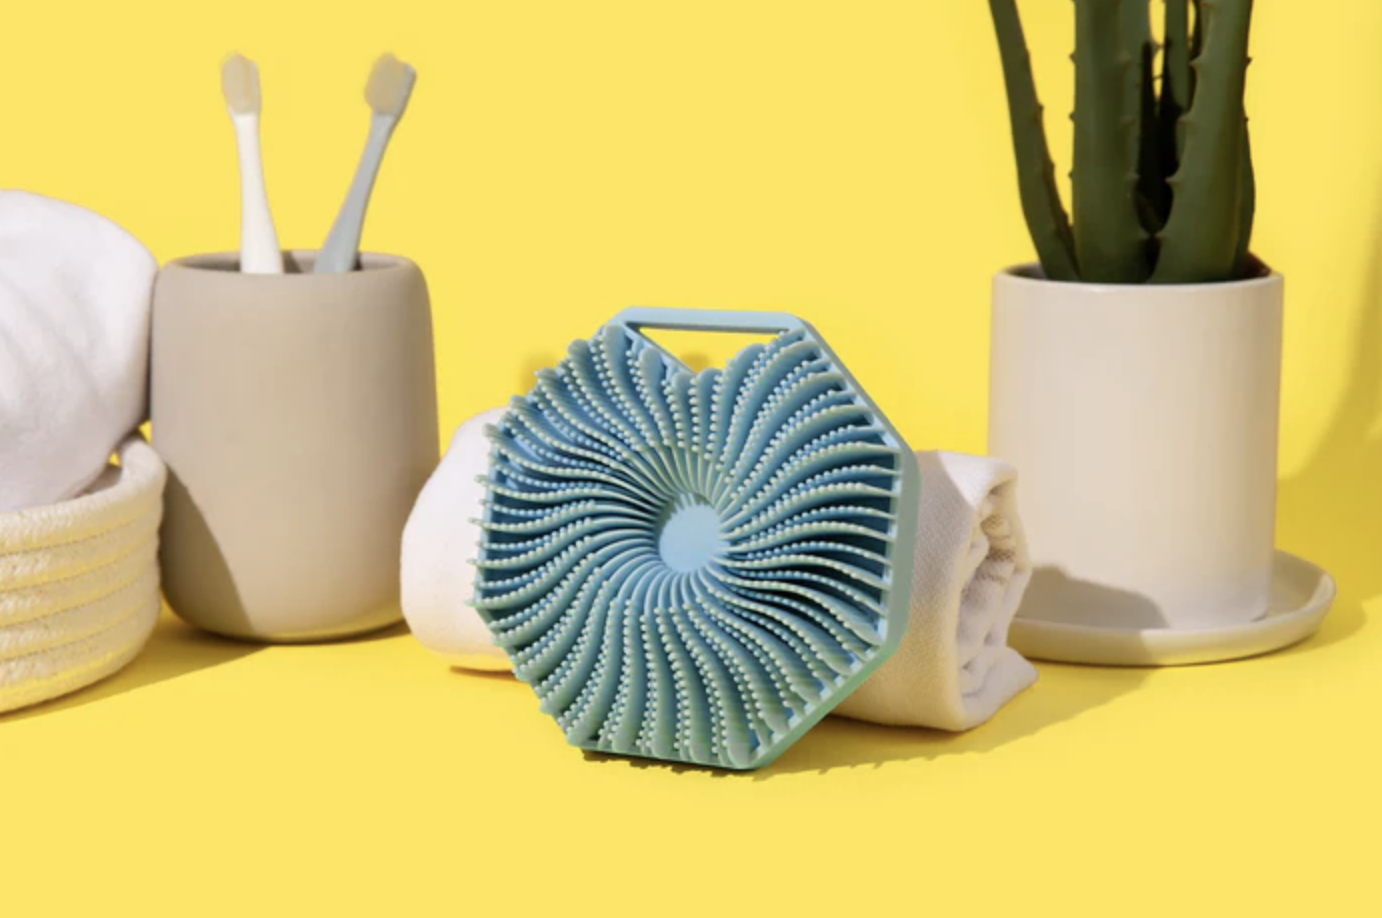 Eco-friendly bathroom accessories including a loofah, toothbrushes, and a plant on a yellow background